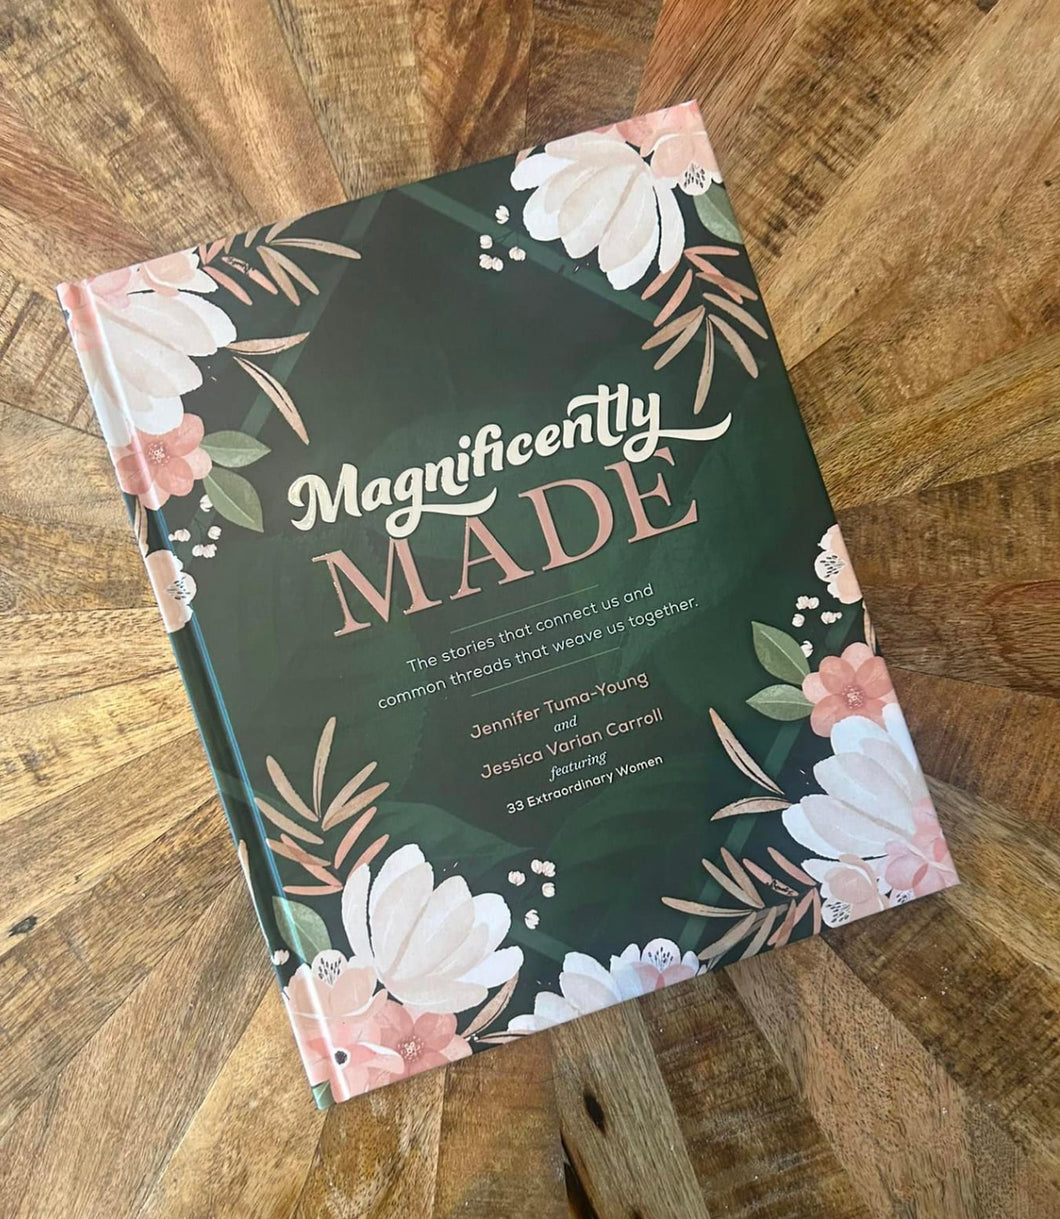 BOOK - Magnificently Made - A collection of stories by 33 extraordinary women